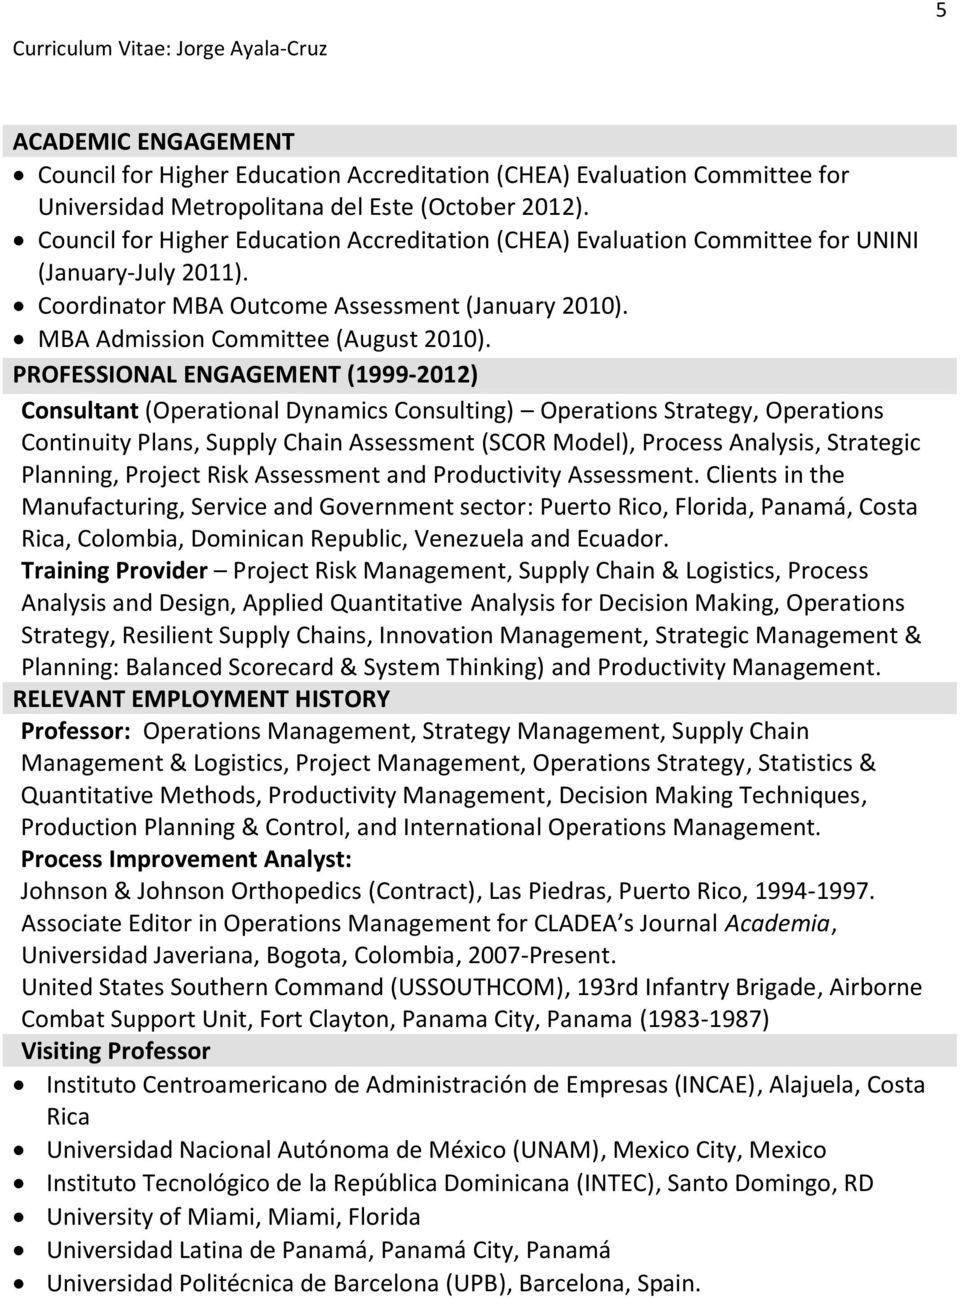 PROFESSIONAL ENGAGEMENT (1999-2012) Consultant (Operational Dynamics Consulting) Operations Strategy, Operations Continuity Plans, Supply Chain Assessment (SCOR Model), Process Analysis, Strategic